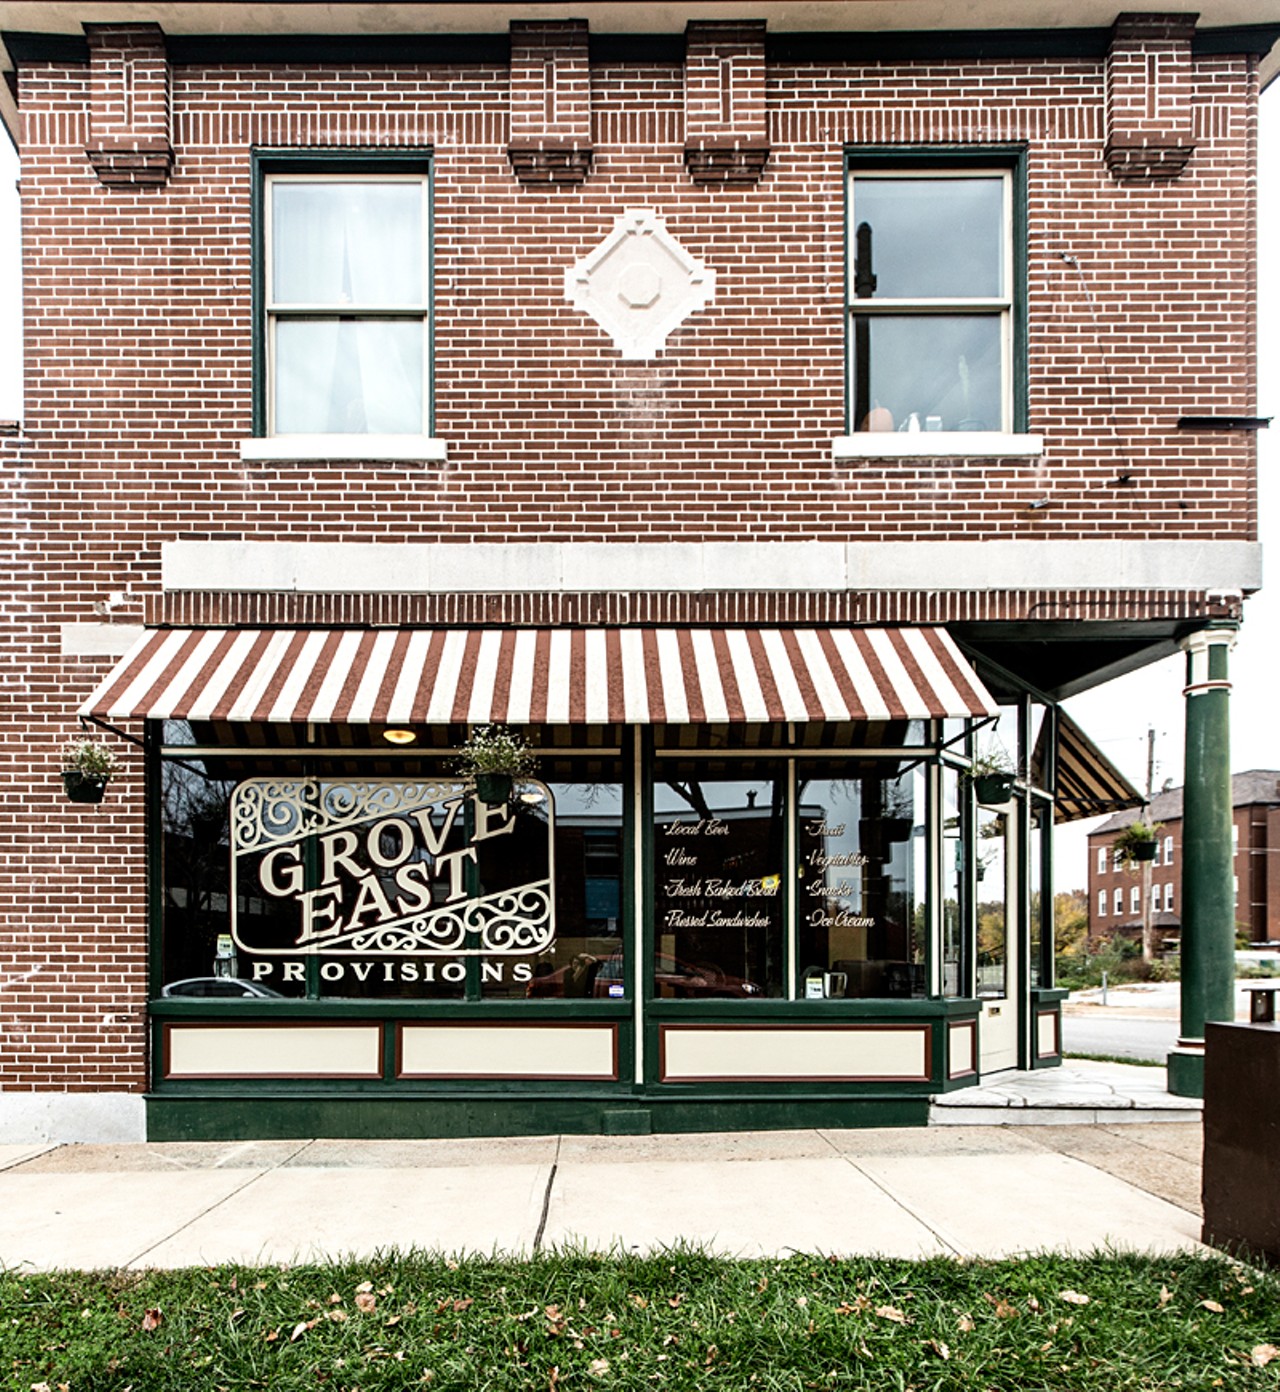 Grove East Provisions storefront.